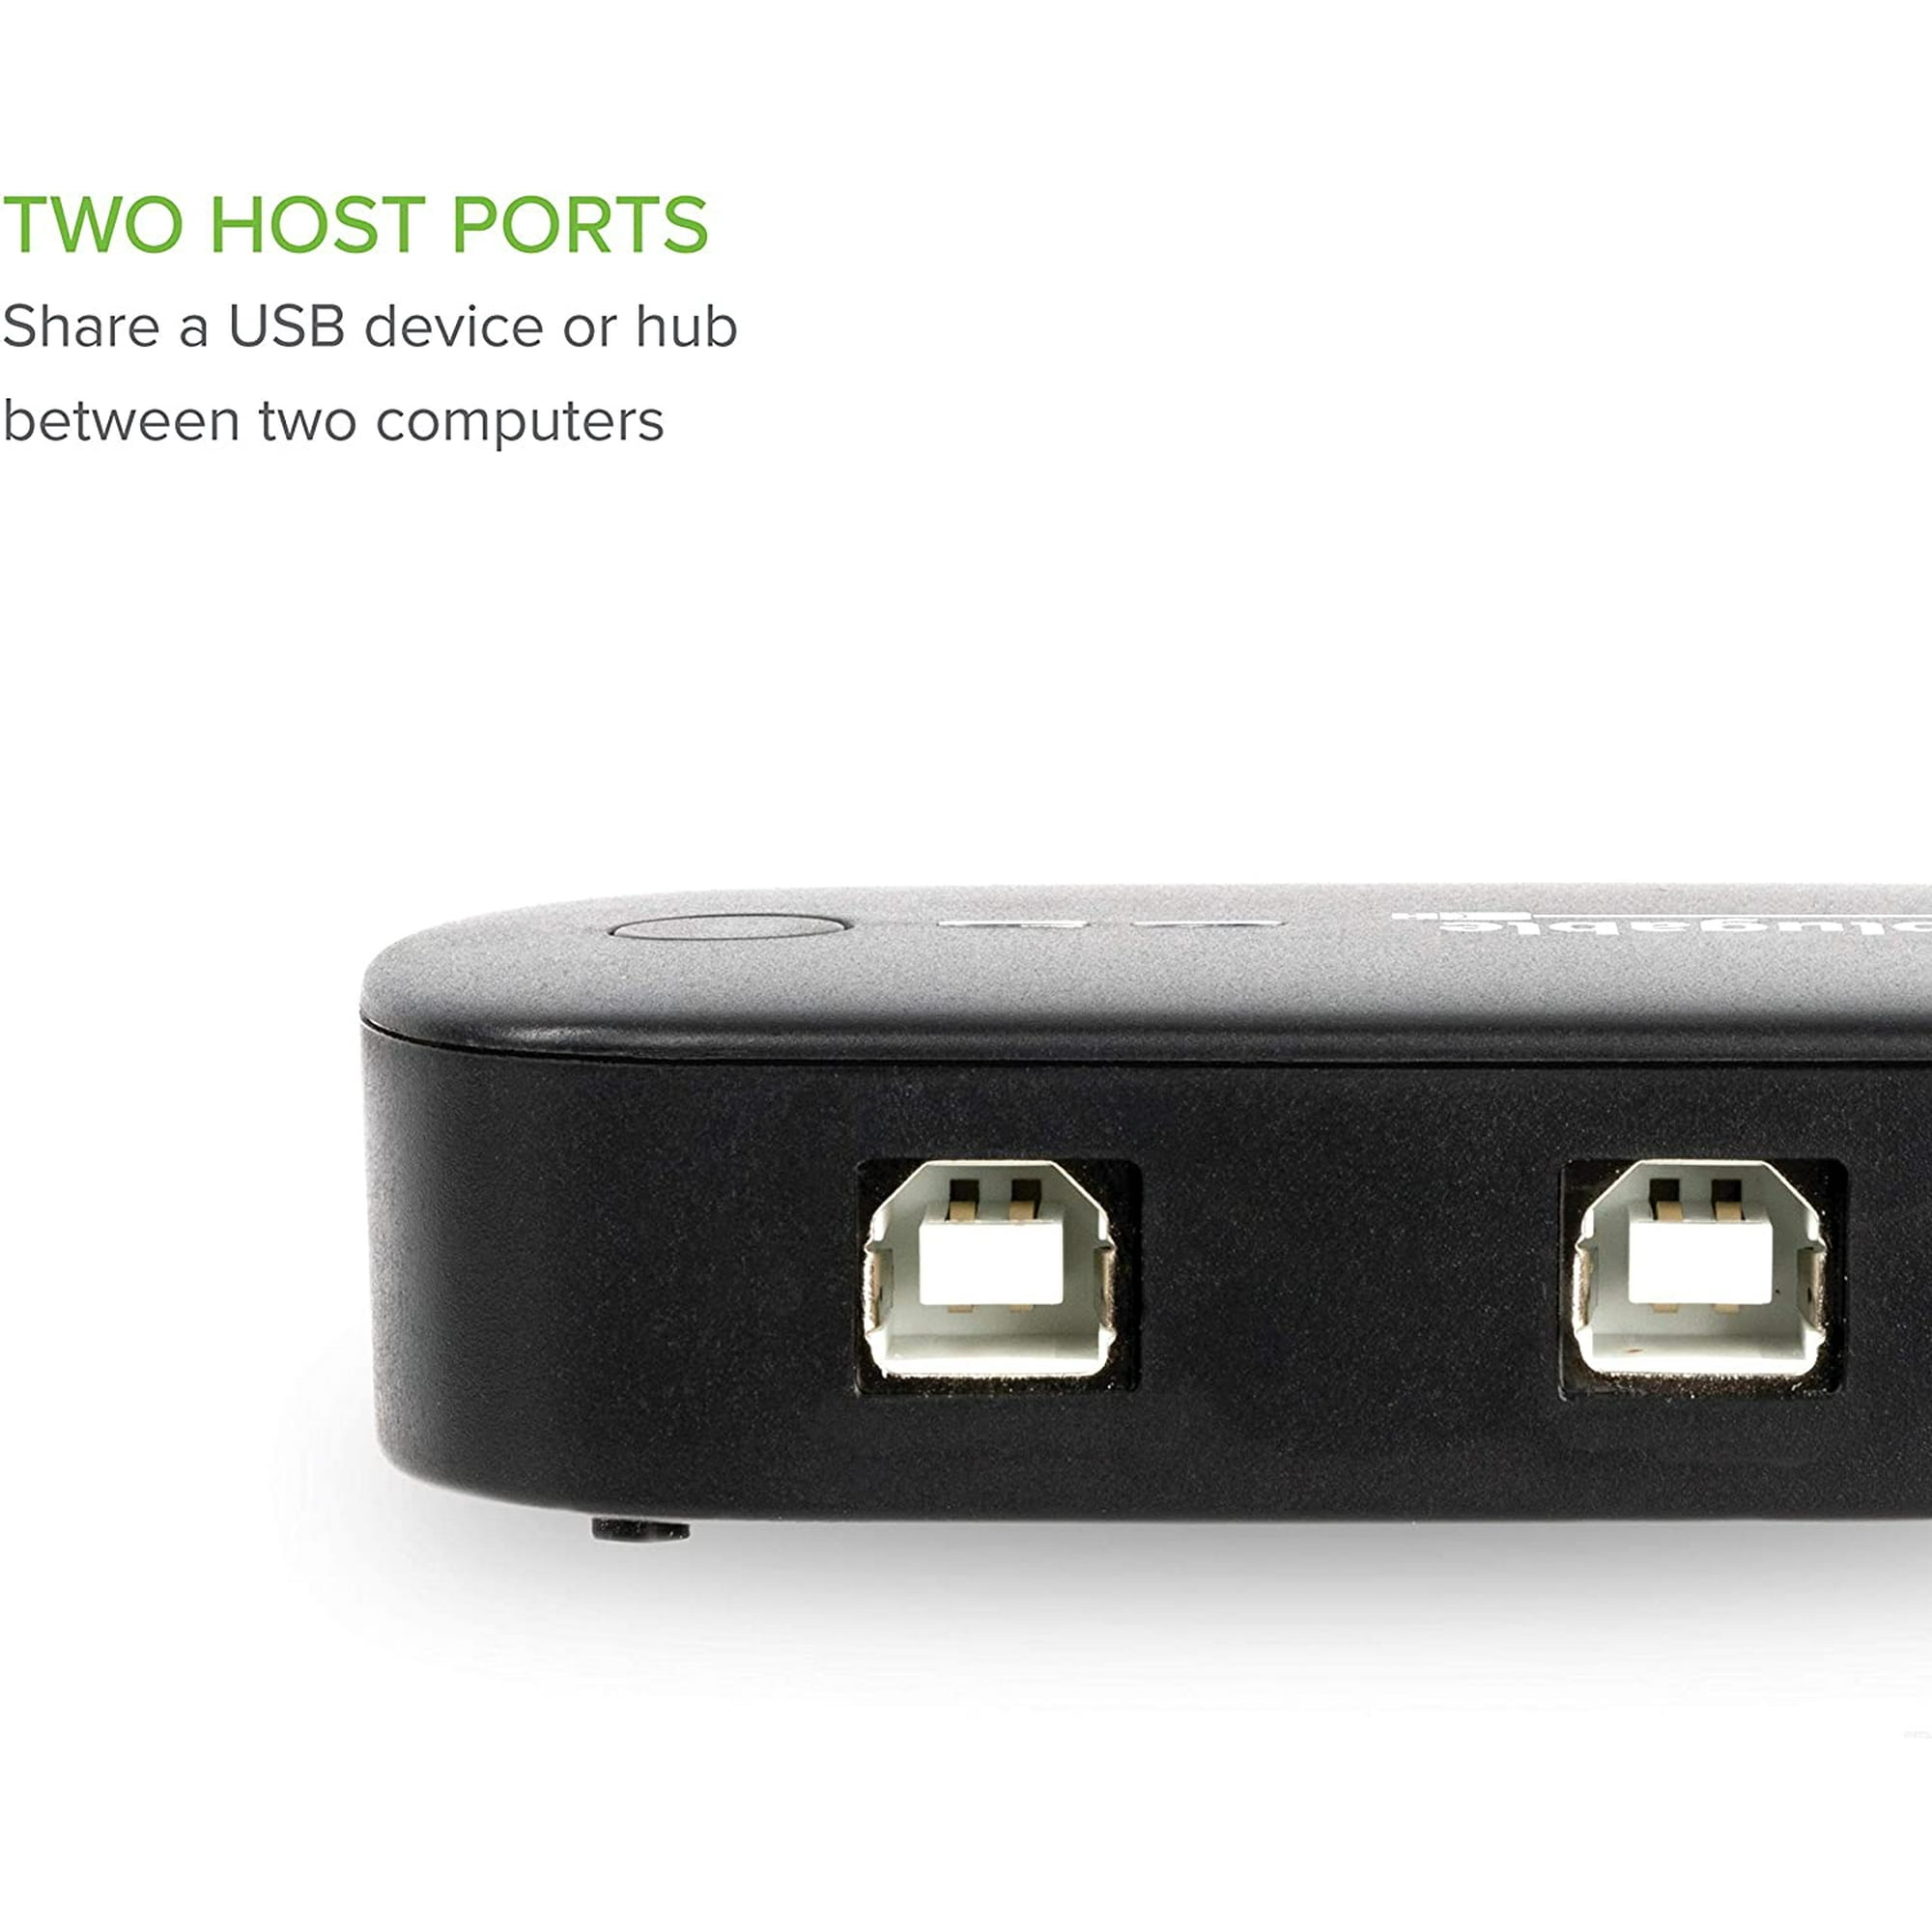 Plugable USB 2.0 Switch for One-Button Device Port Sharing Two Computers (AB Switch) | Walmart Canada